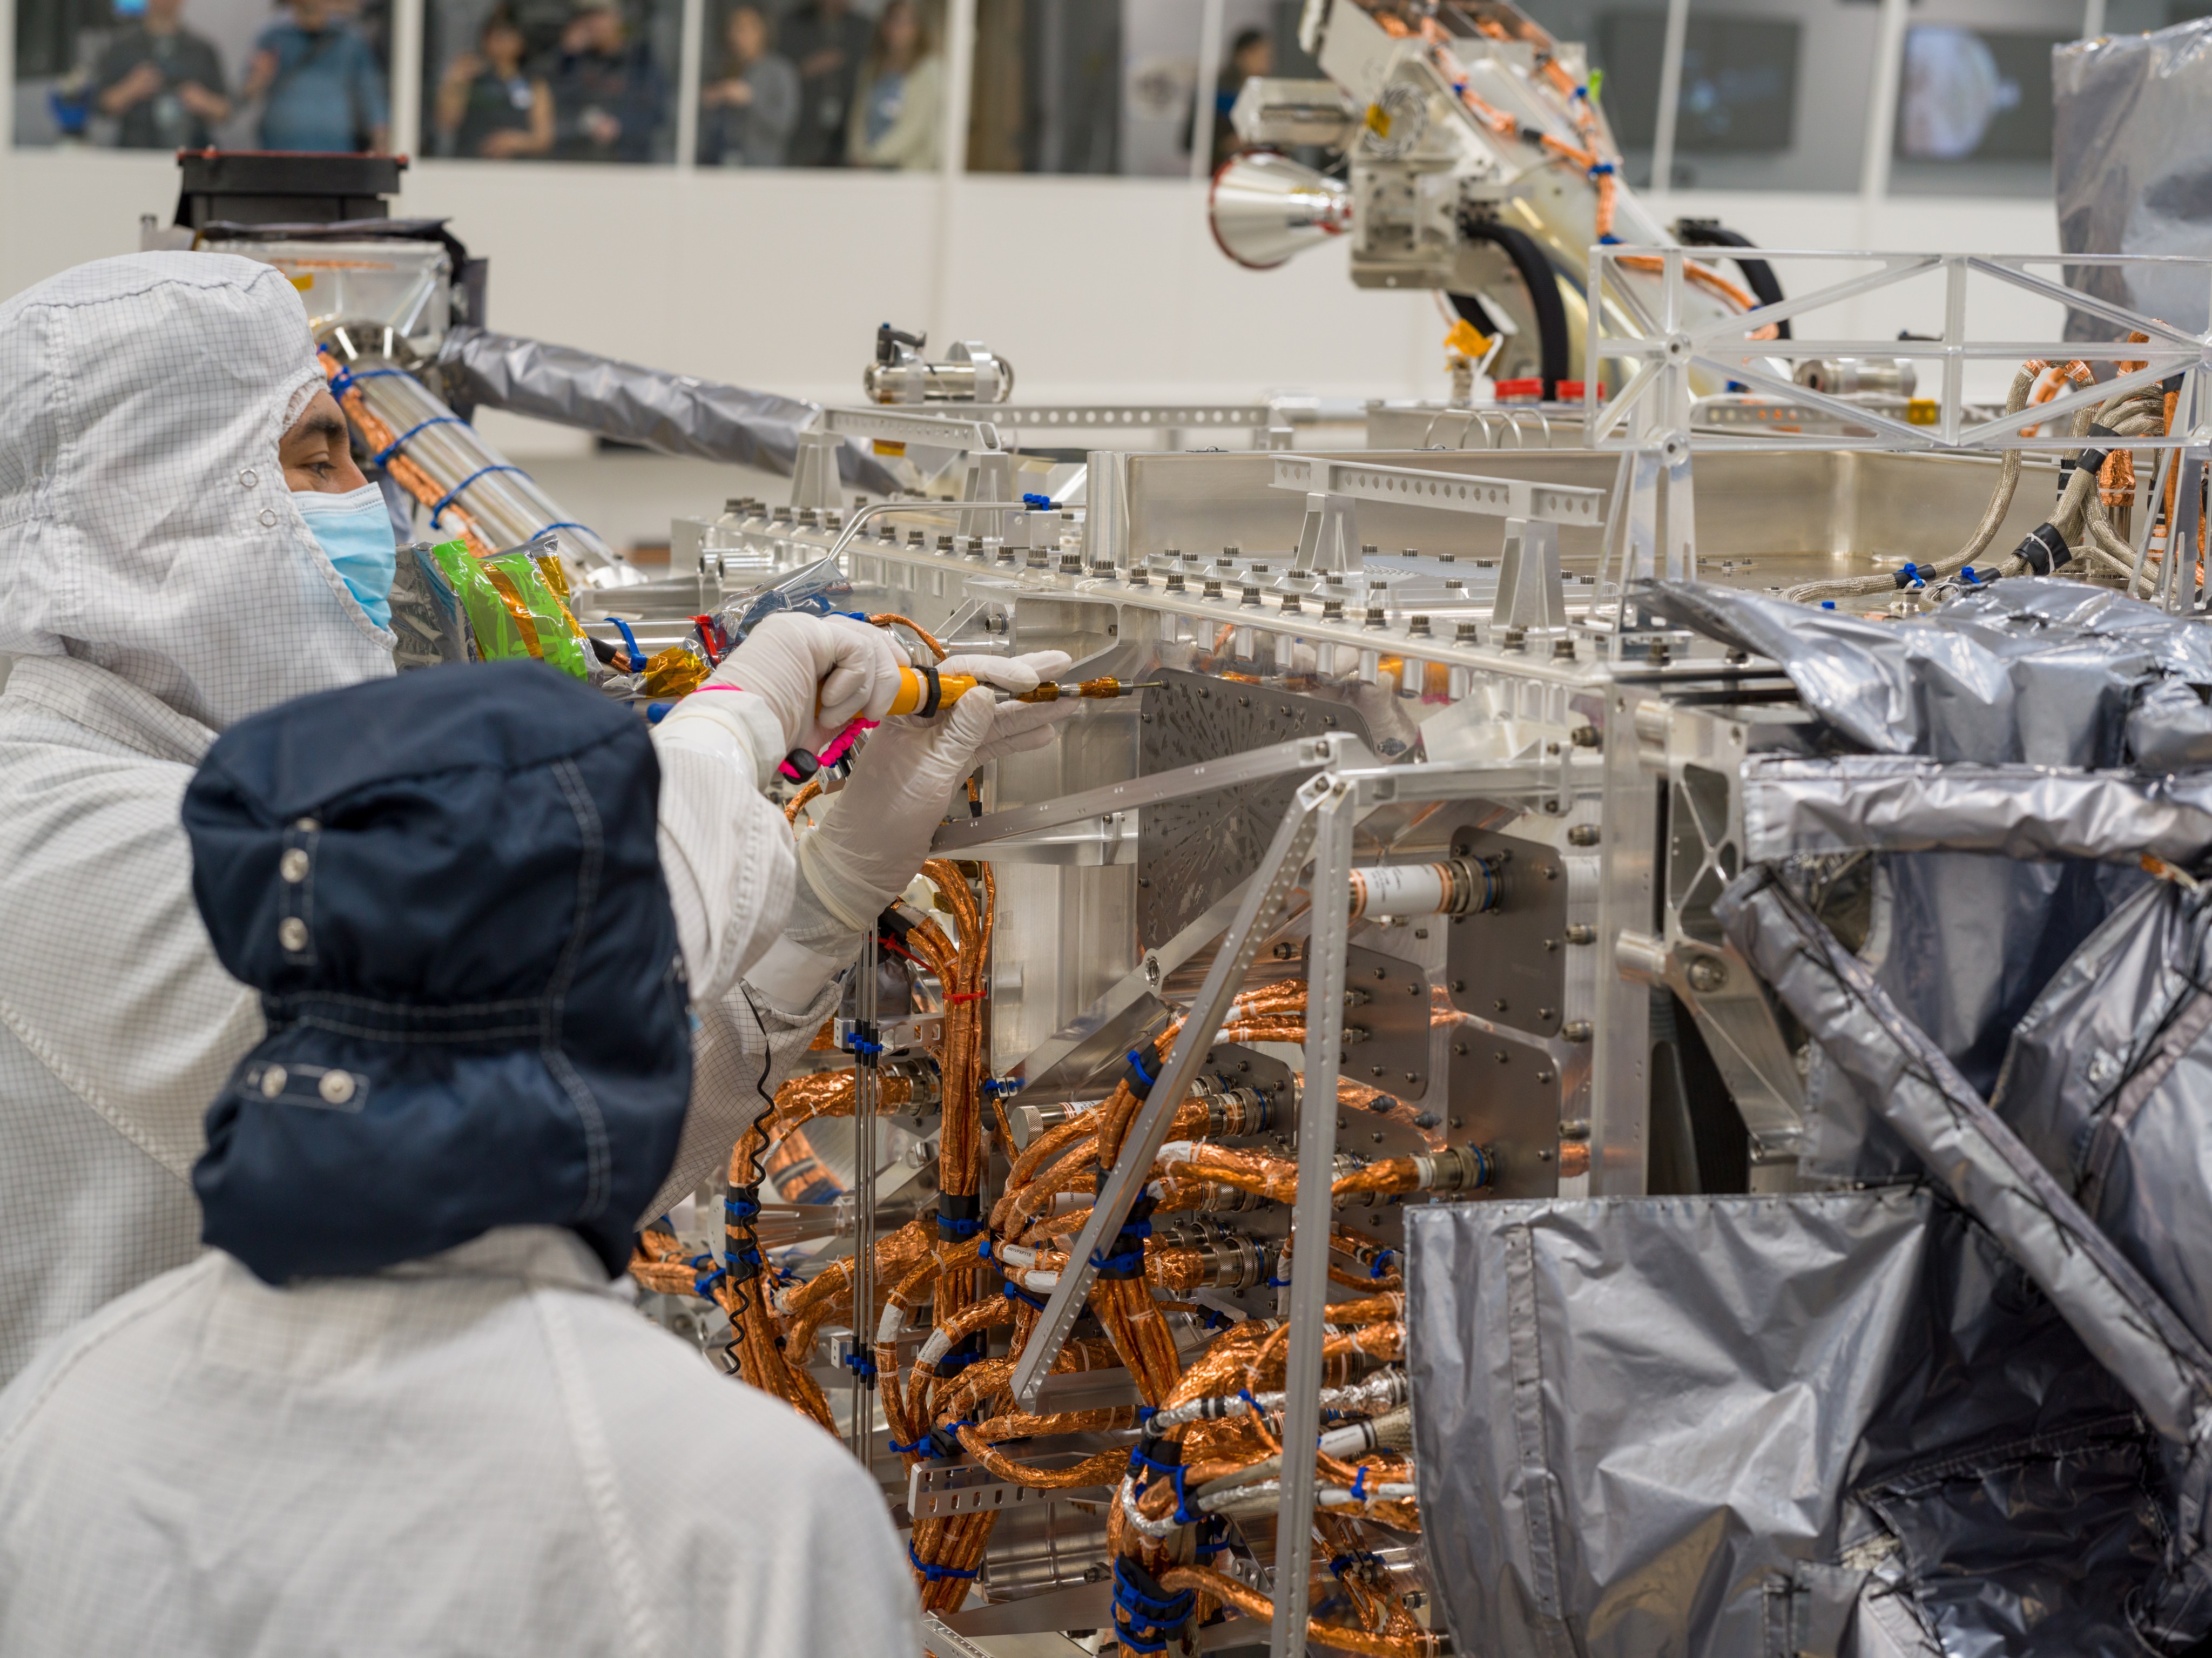 A worker dressed in white protective clothing uses an orange-handled screwdriver to turn a screw attaching the triangular-shaped silver-colored vault plate to Europa Clipper. Wires and other parts of the spacecraft are visible. Another worker dressed in white and blue head cover looks on.